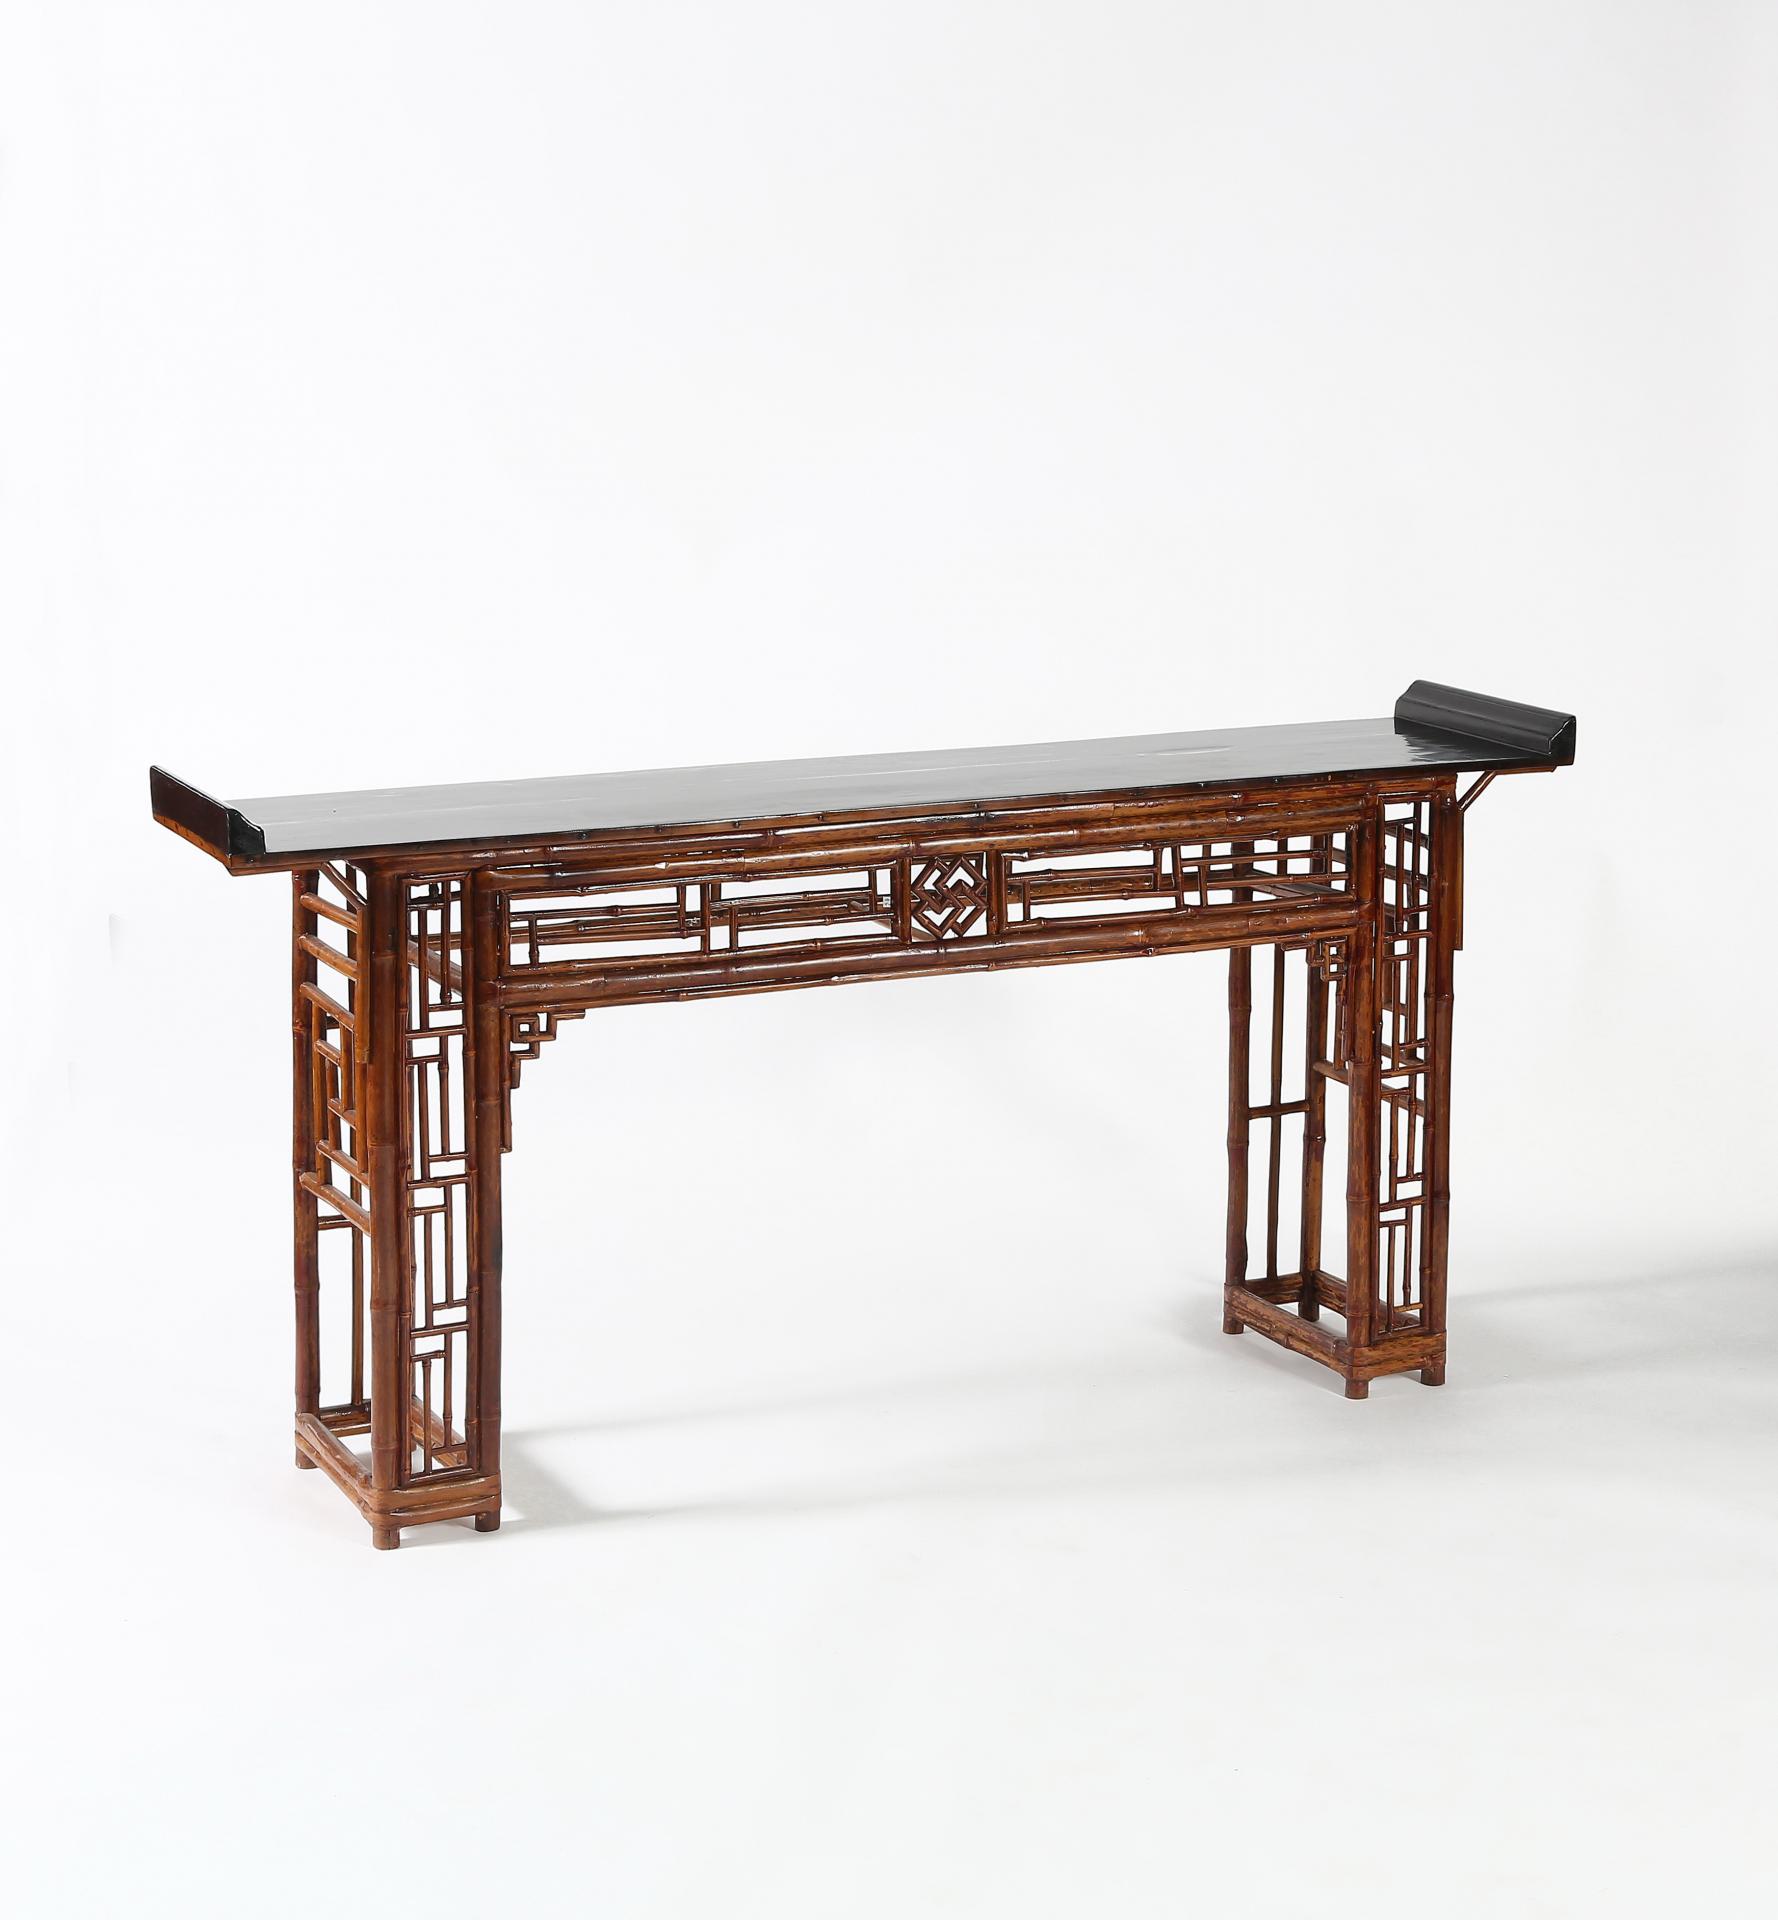 Discover the Charm of Antique Bamboo Furniture at Altfield Gallery